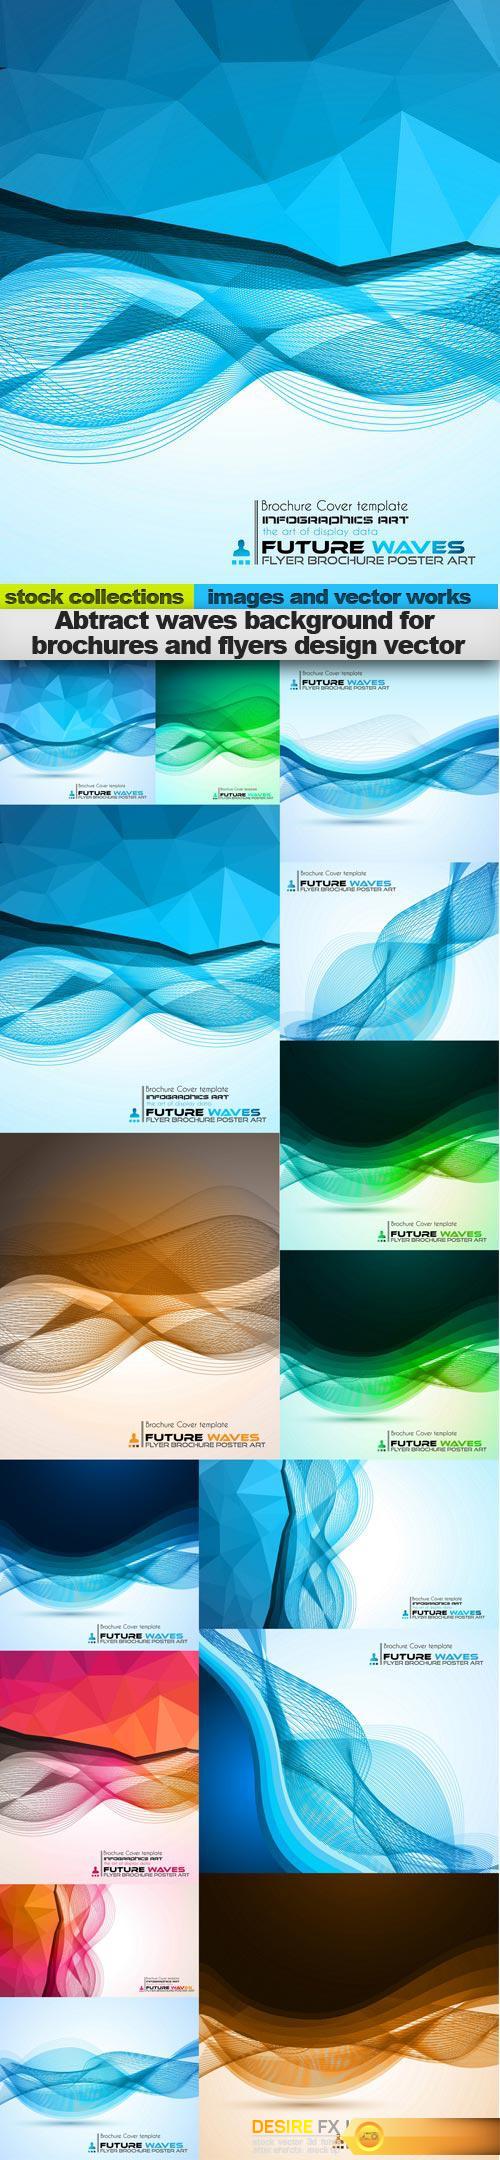 Abtract waves background for brochures and flyers design vector, 15 x EPS